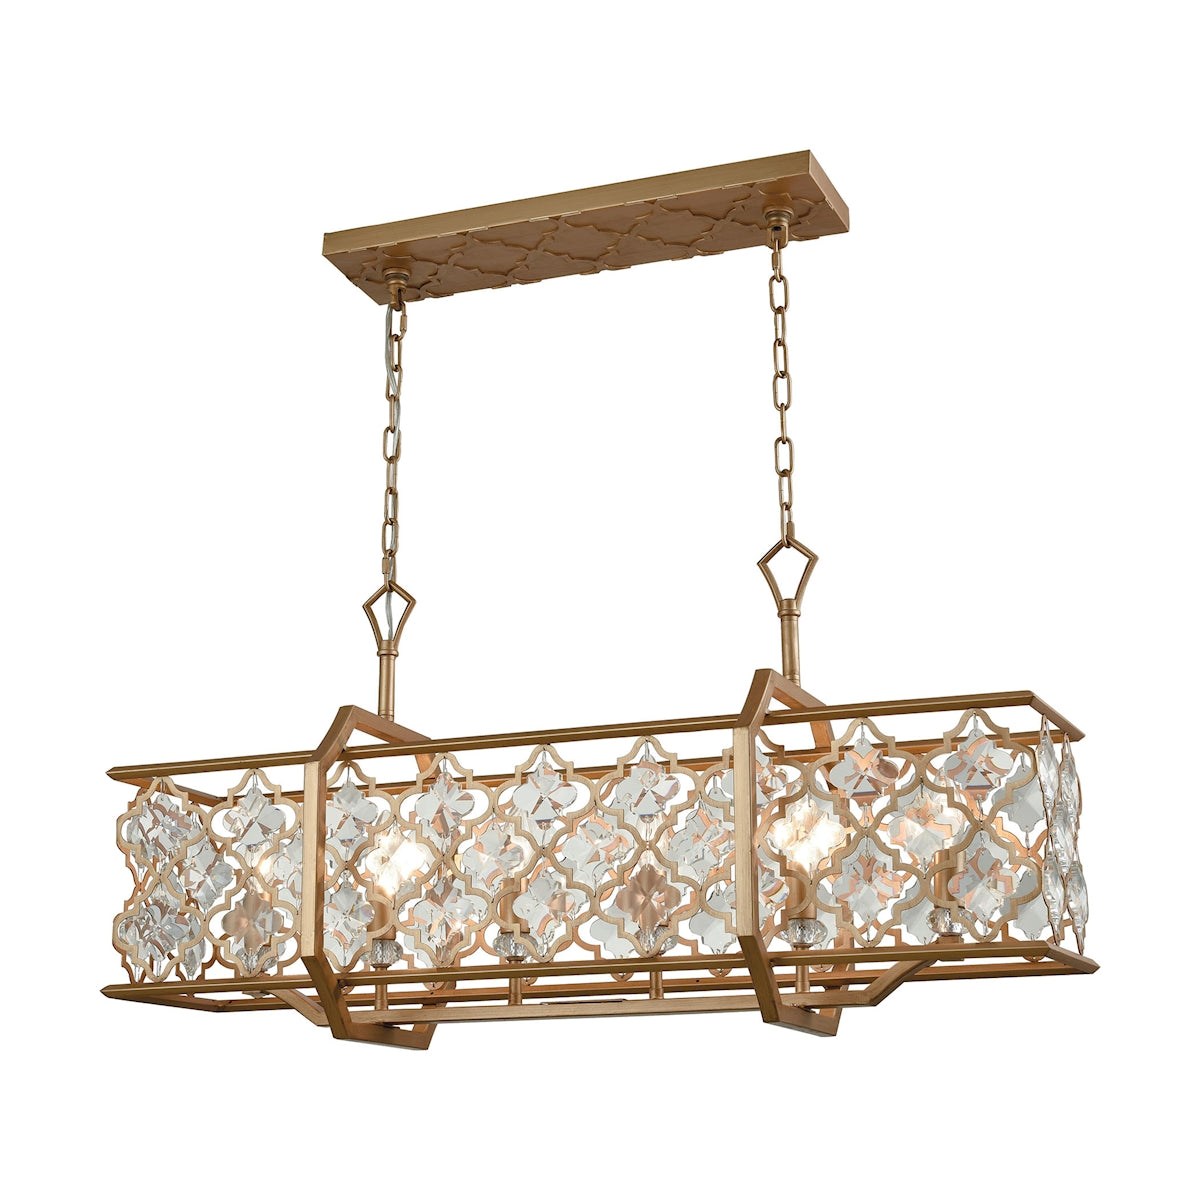 ELK Lighting 32095/6 Armand 6-Light Chandelier in Matte Gold with Clear Crystals